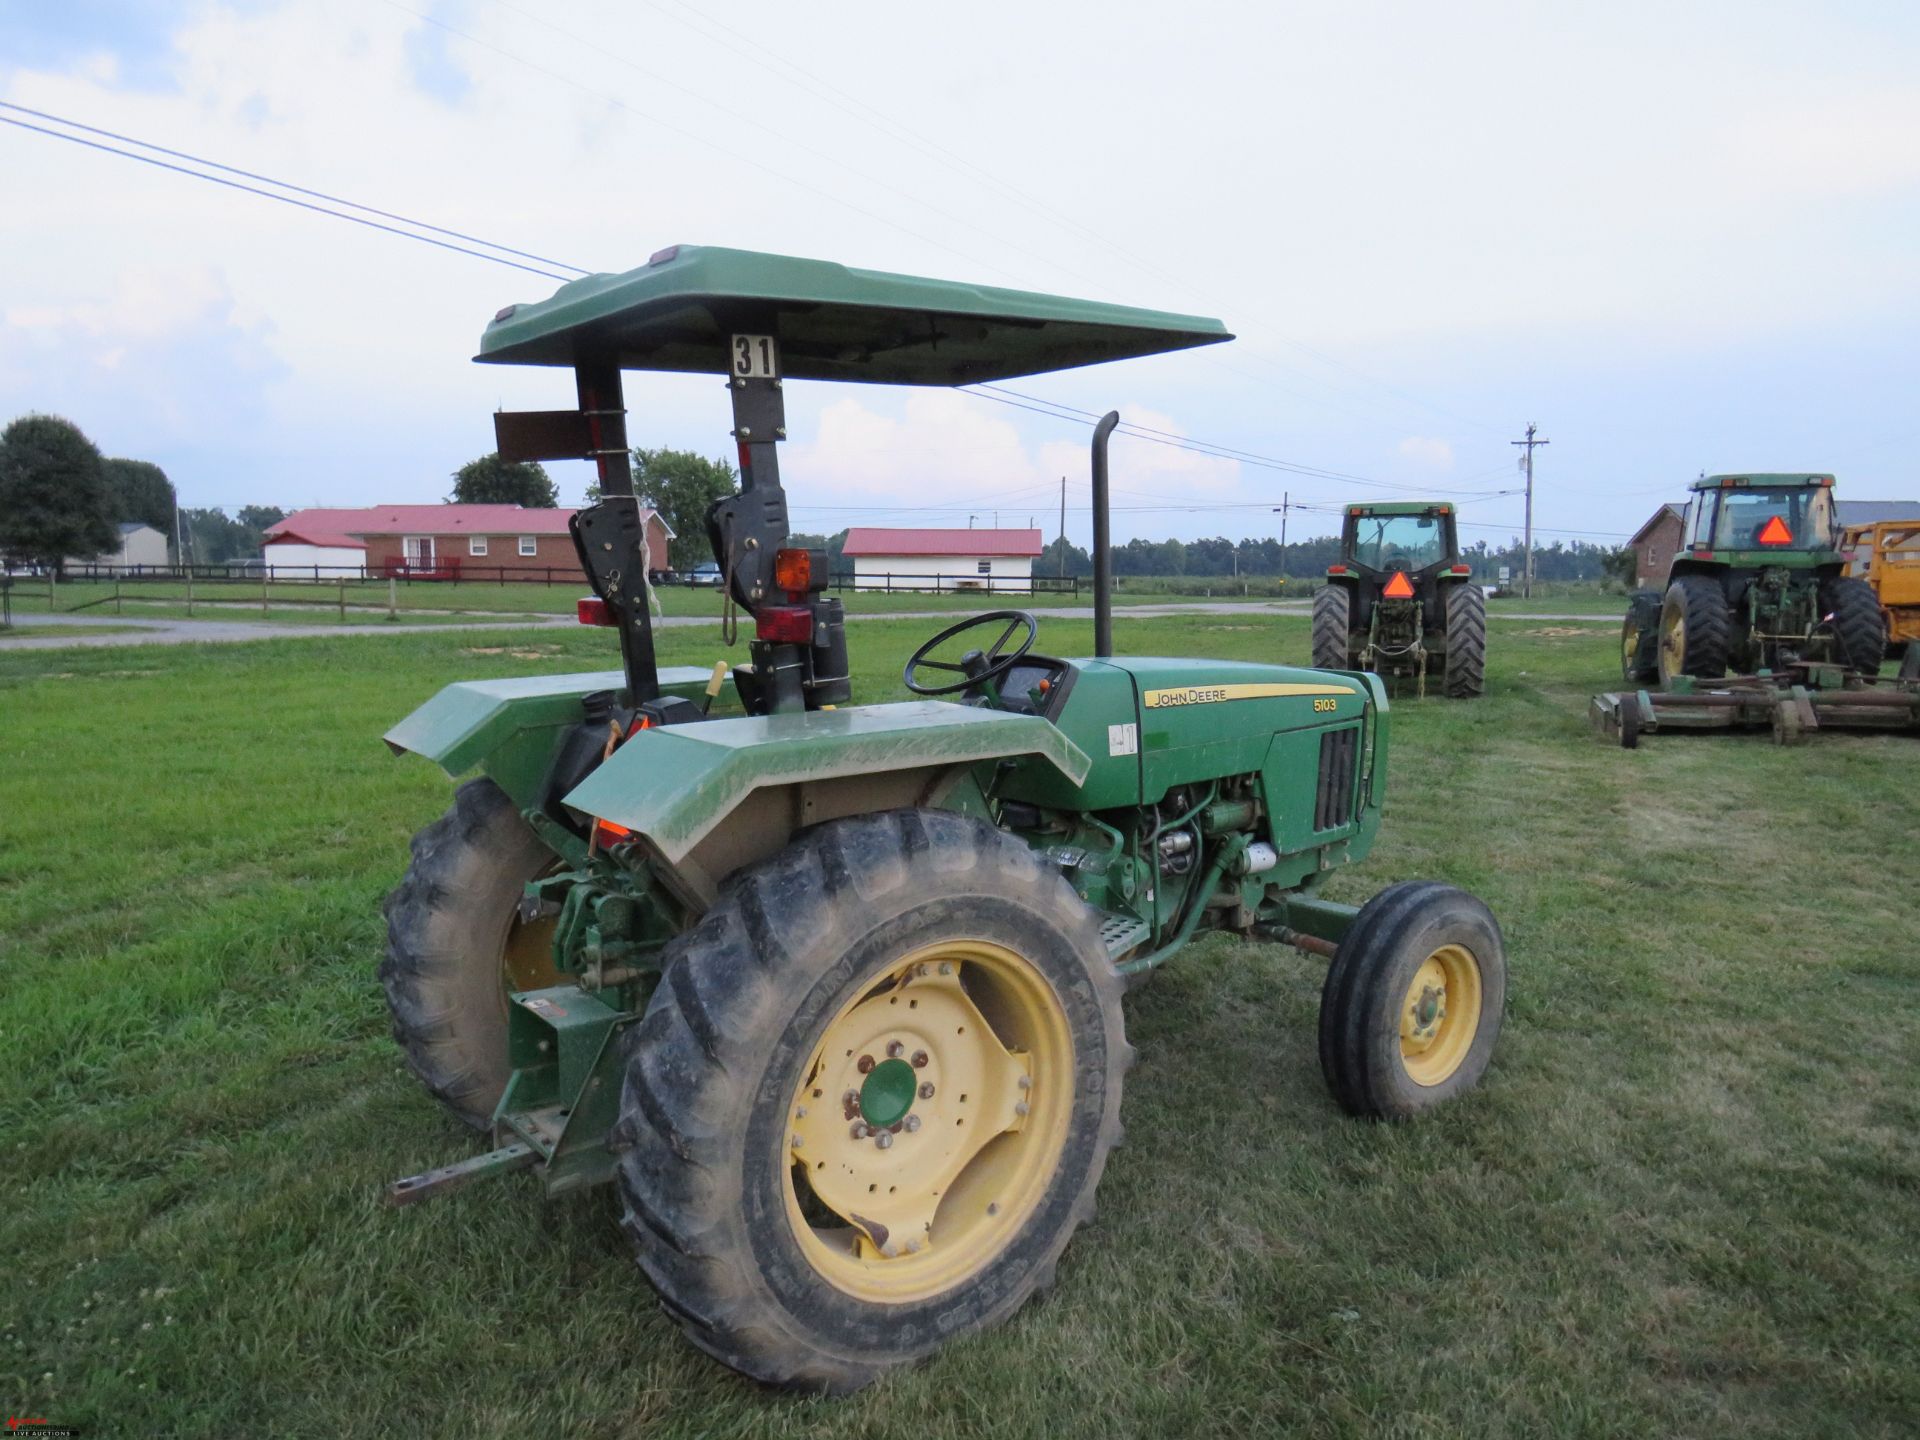 2007 JOHN DEERE 5103 TRACTOR WITH CANOPY, PTO, NO 3PT, 13.6-28 REAR TIRES, 11036 HOURS SHOWING ( - Image 3 of 8